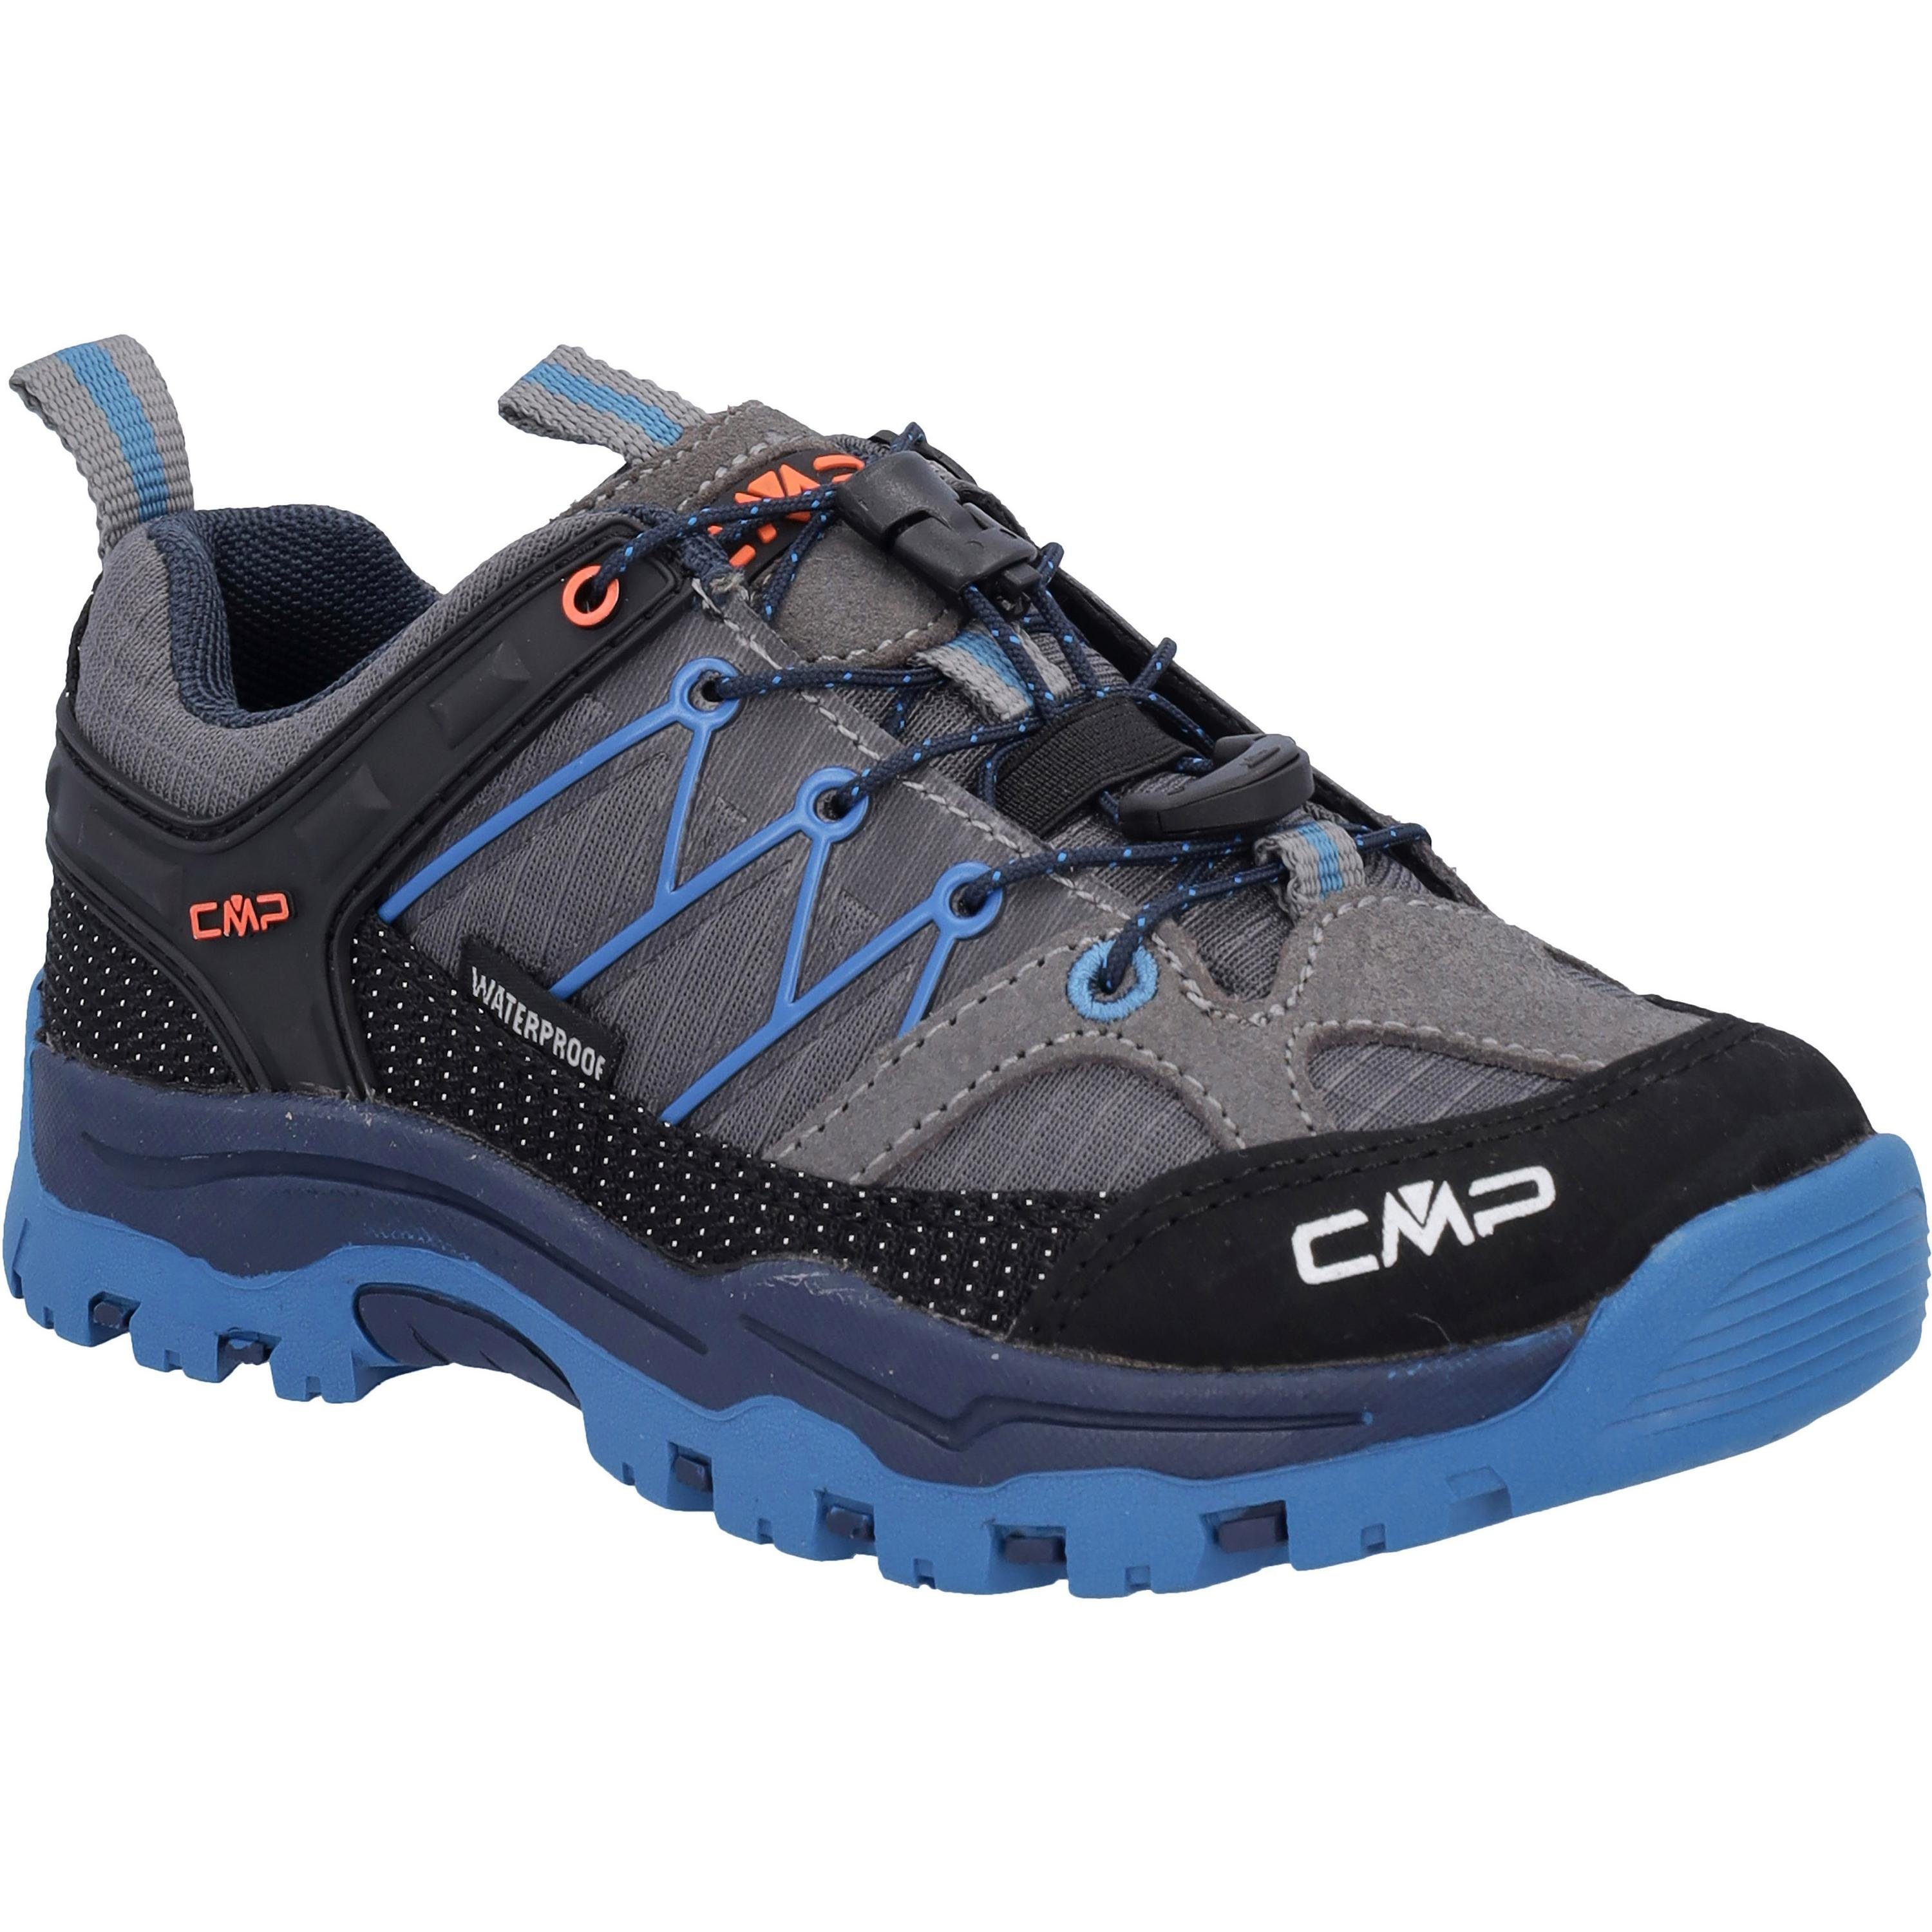 CMP WP Low Outdoorschuh Rigel graffite-oltremare